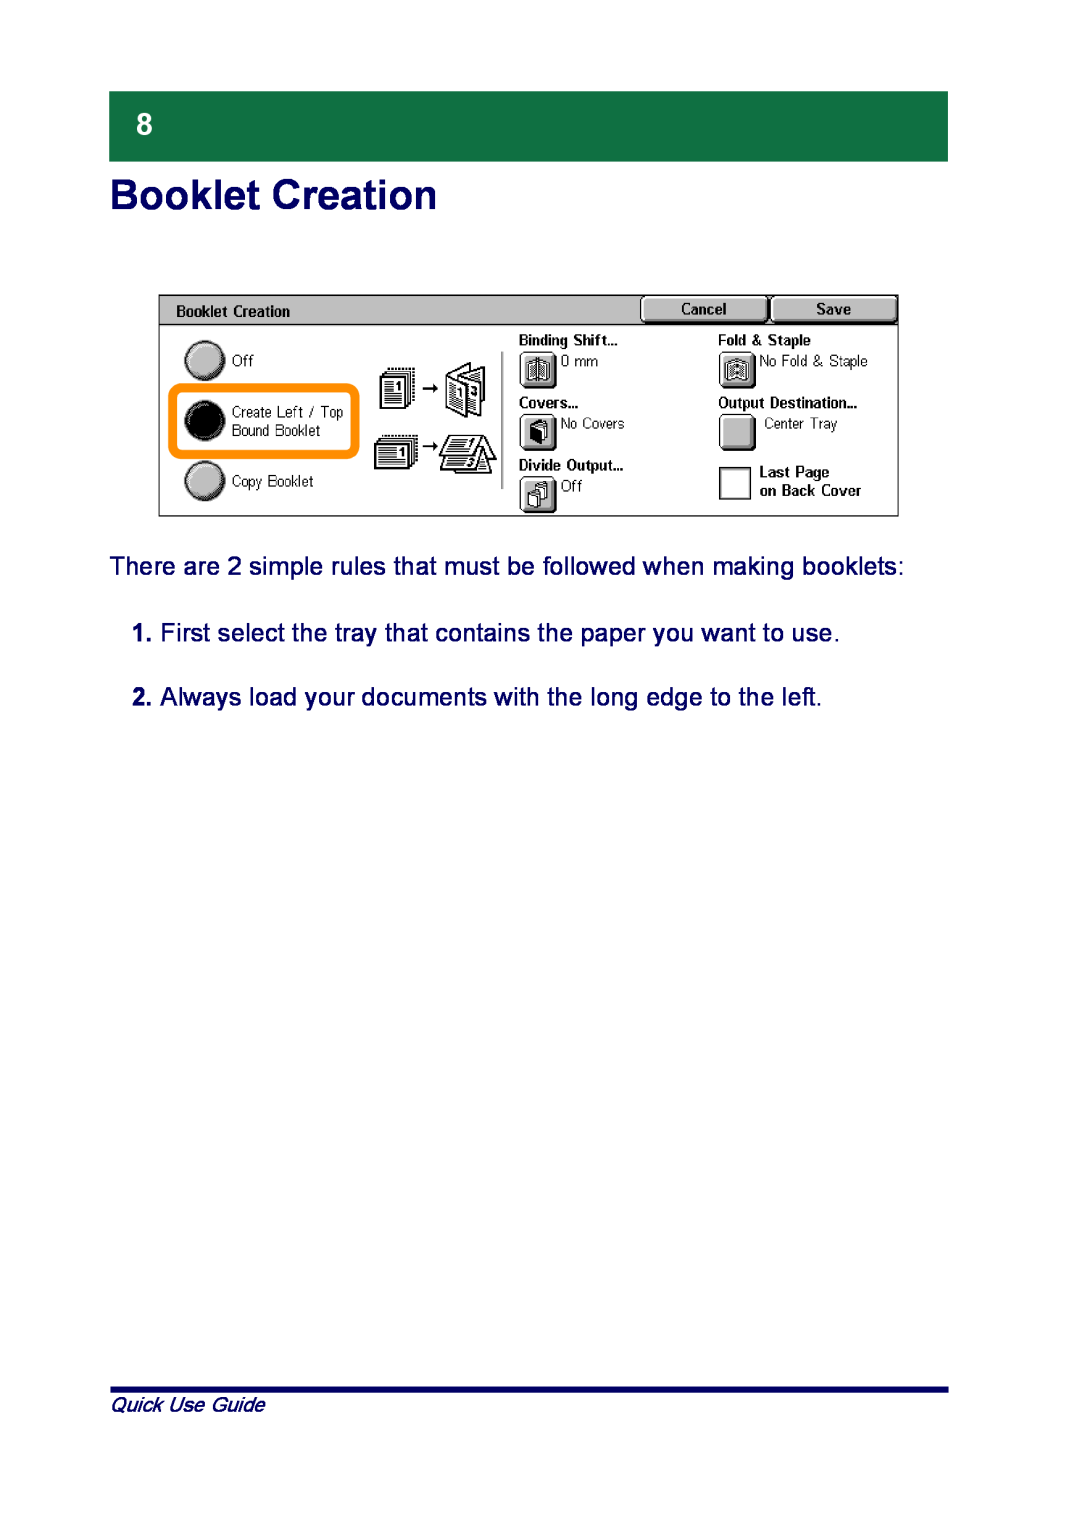 Xerox XT3008EN0-2, ME3612E4-1 manual Booklet Creation, There are 2 simple rules that must be followed when making booklets 